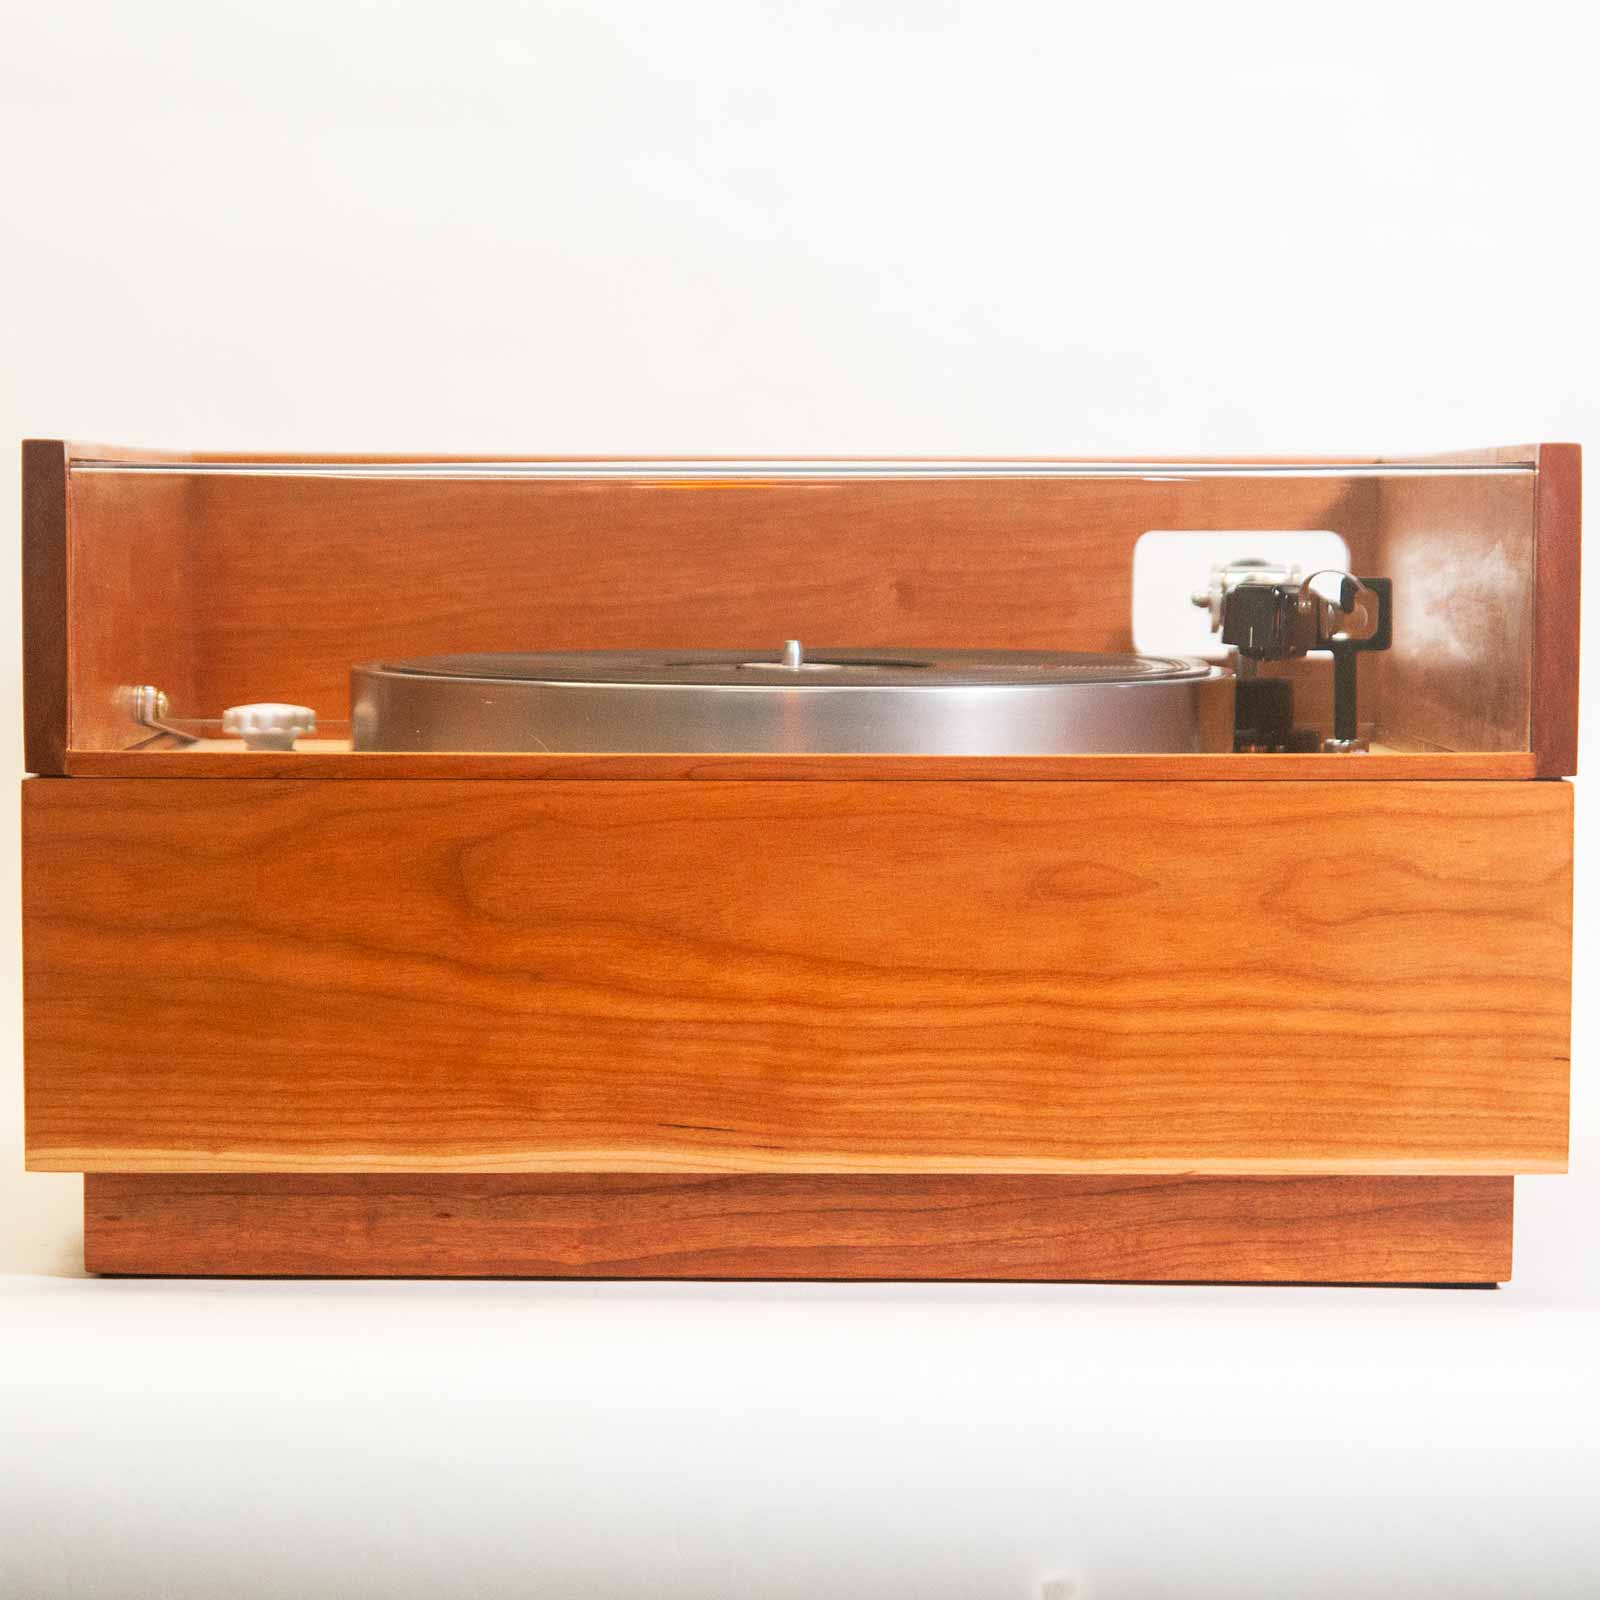 Straight on front view of turntable with dust cover closed